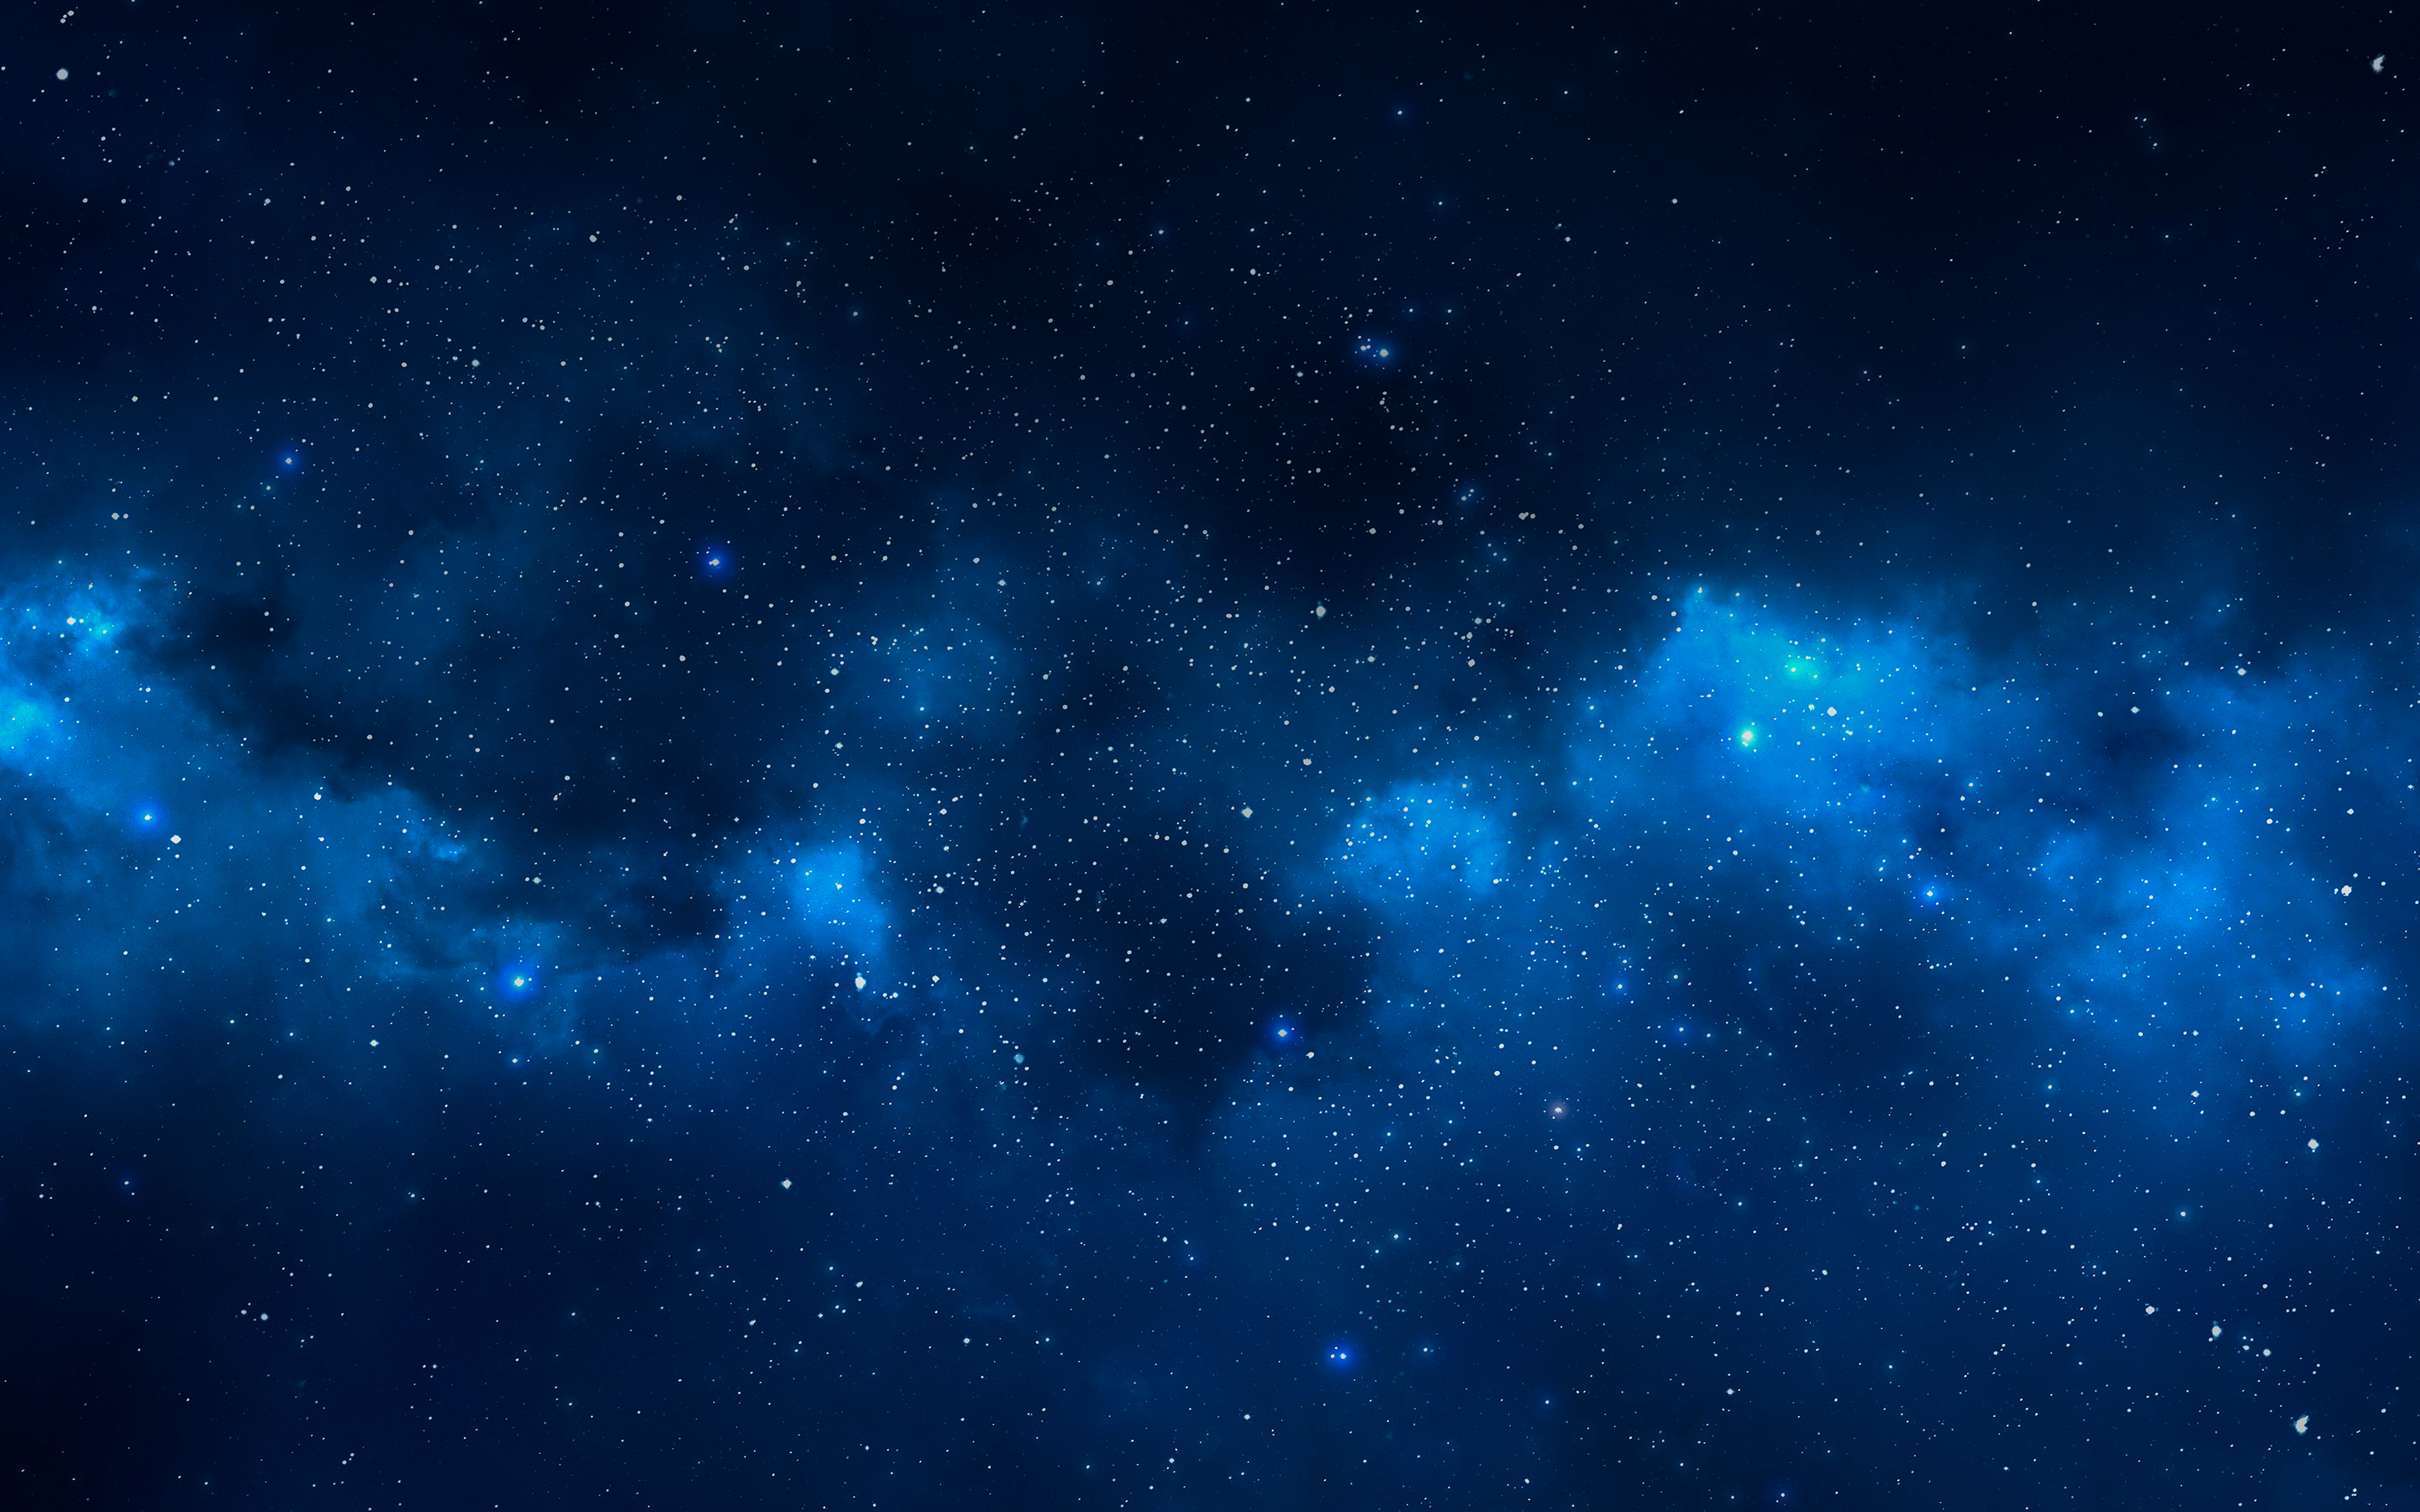 Space Wallpaper Photos Download The BEST Free Space Wallpaper Stock Photos   HD Images